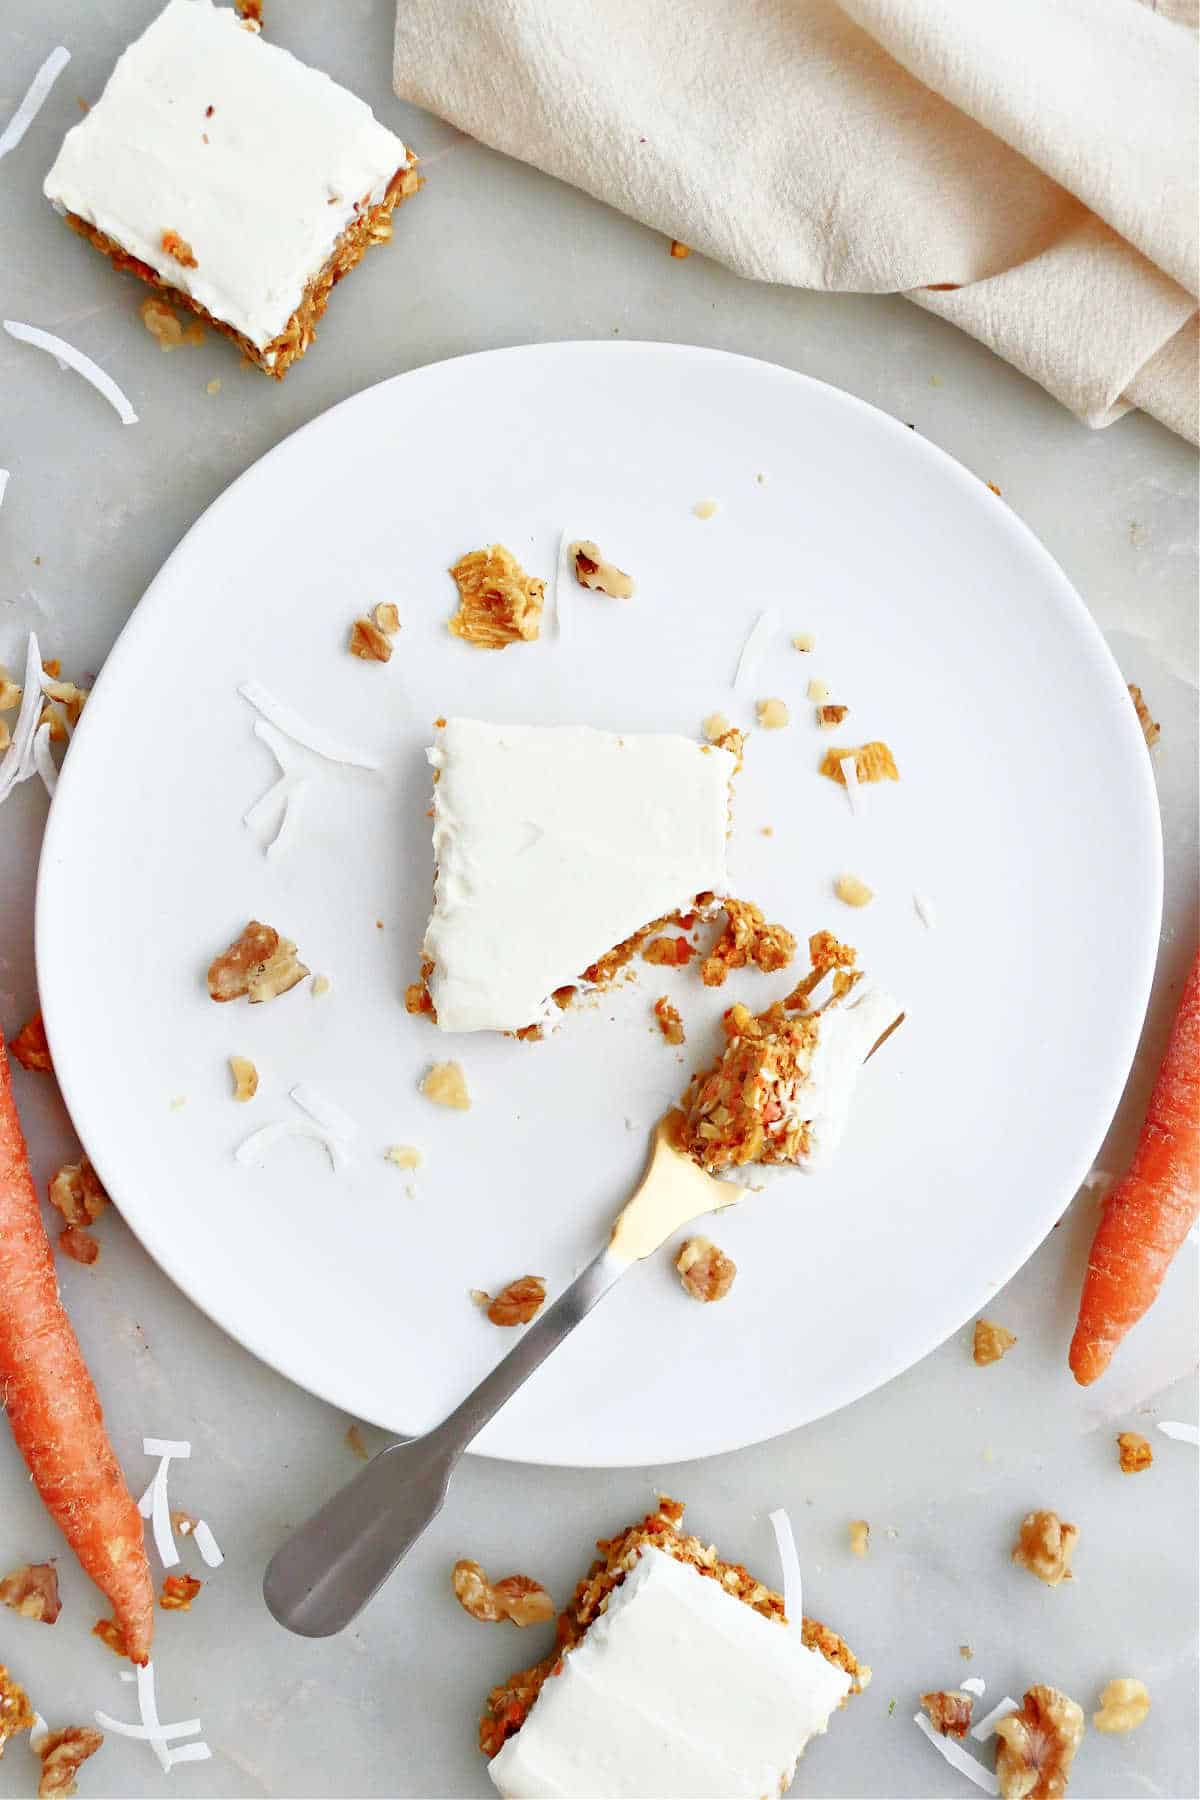 A frosted no bake carrot cake bar on white plate with a fork.